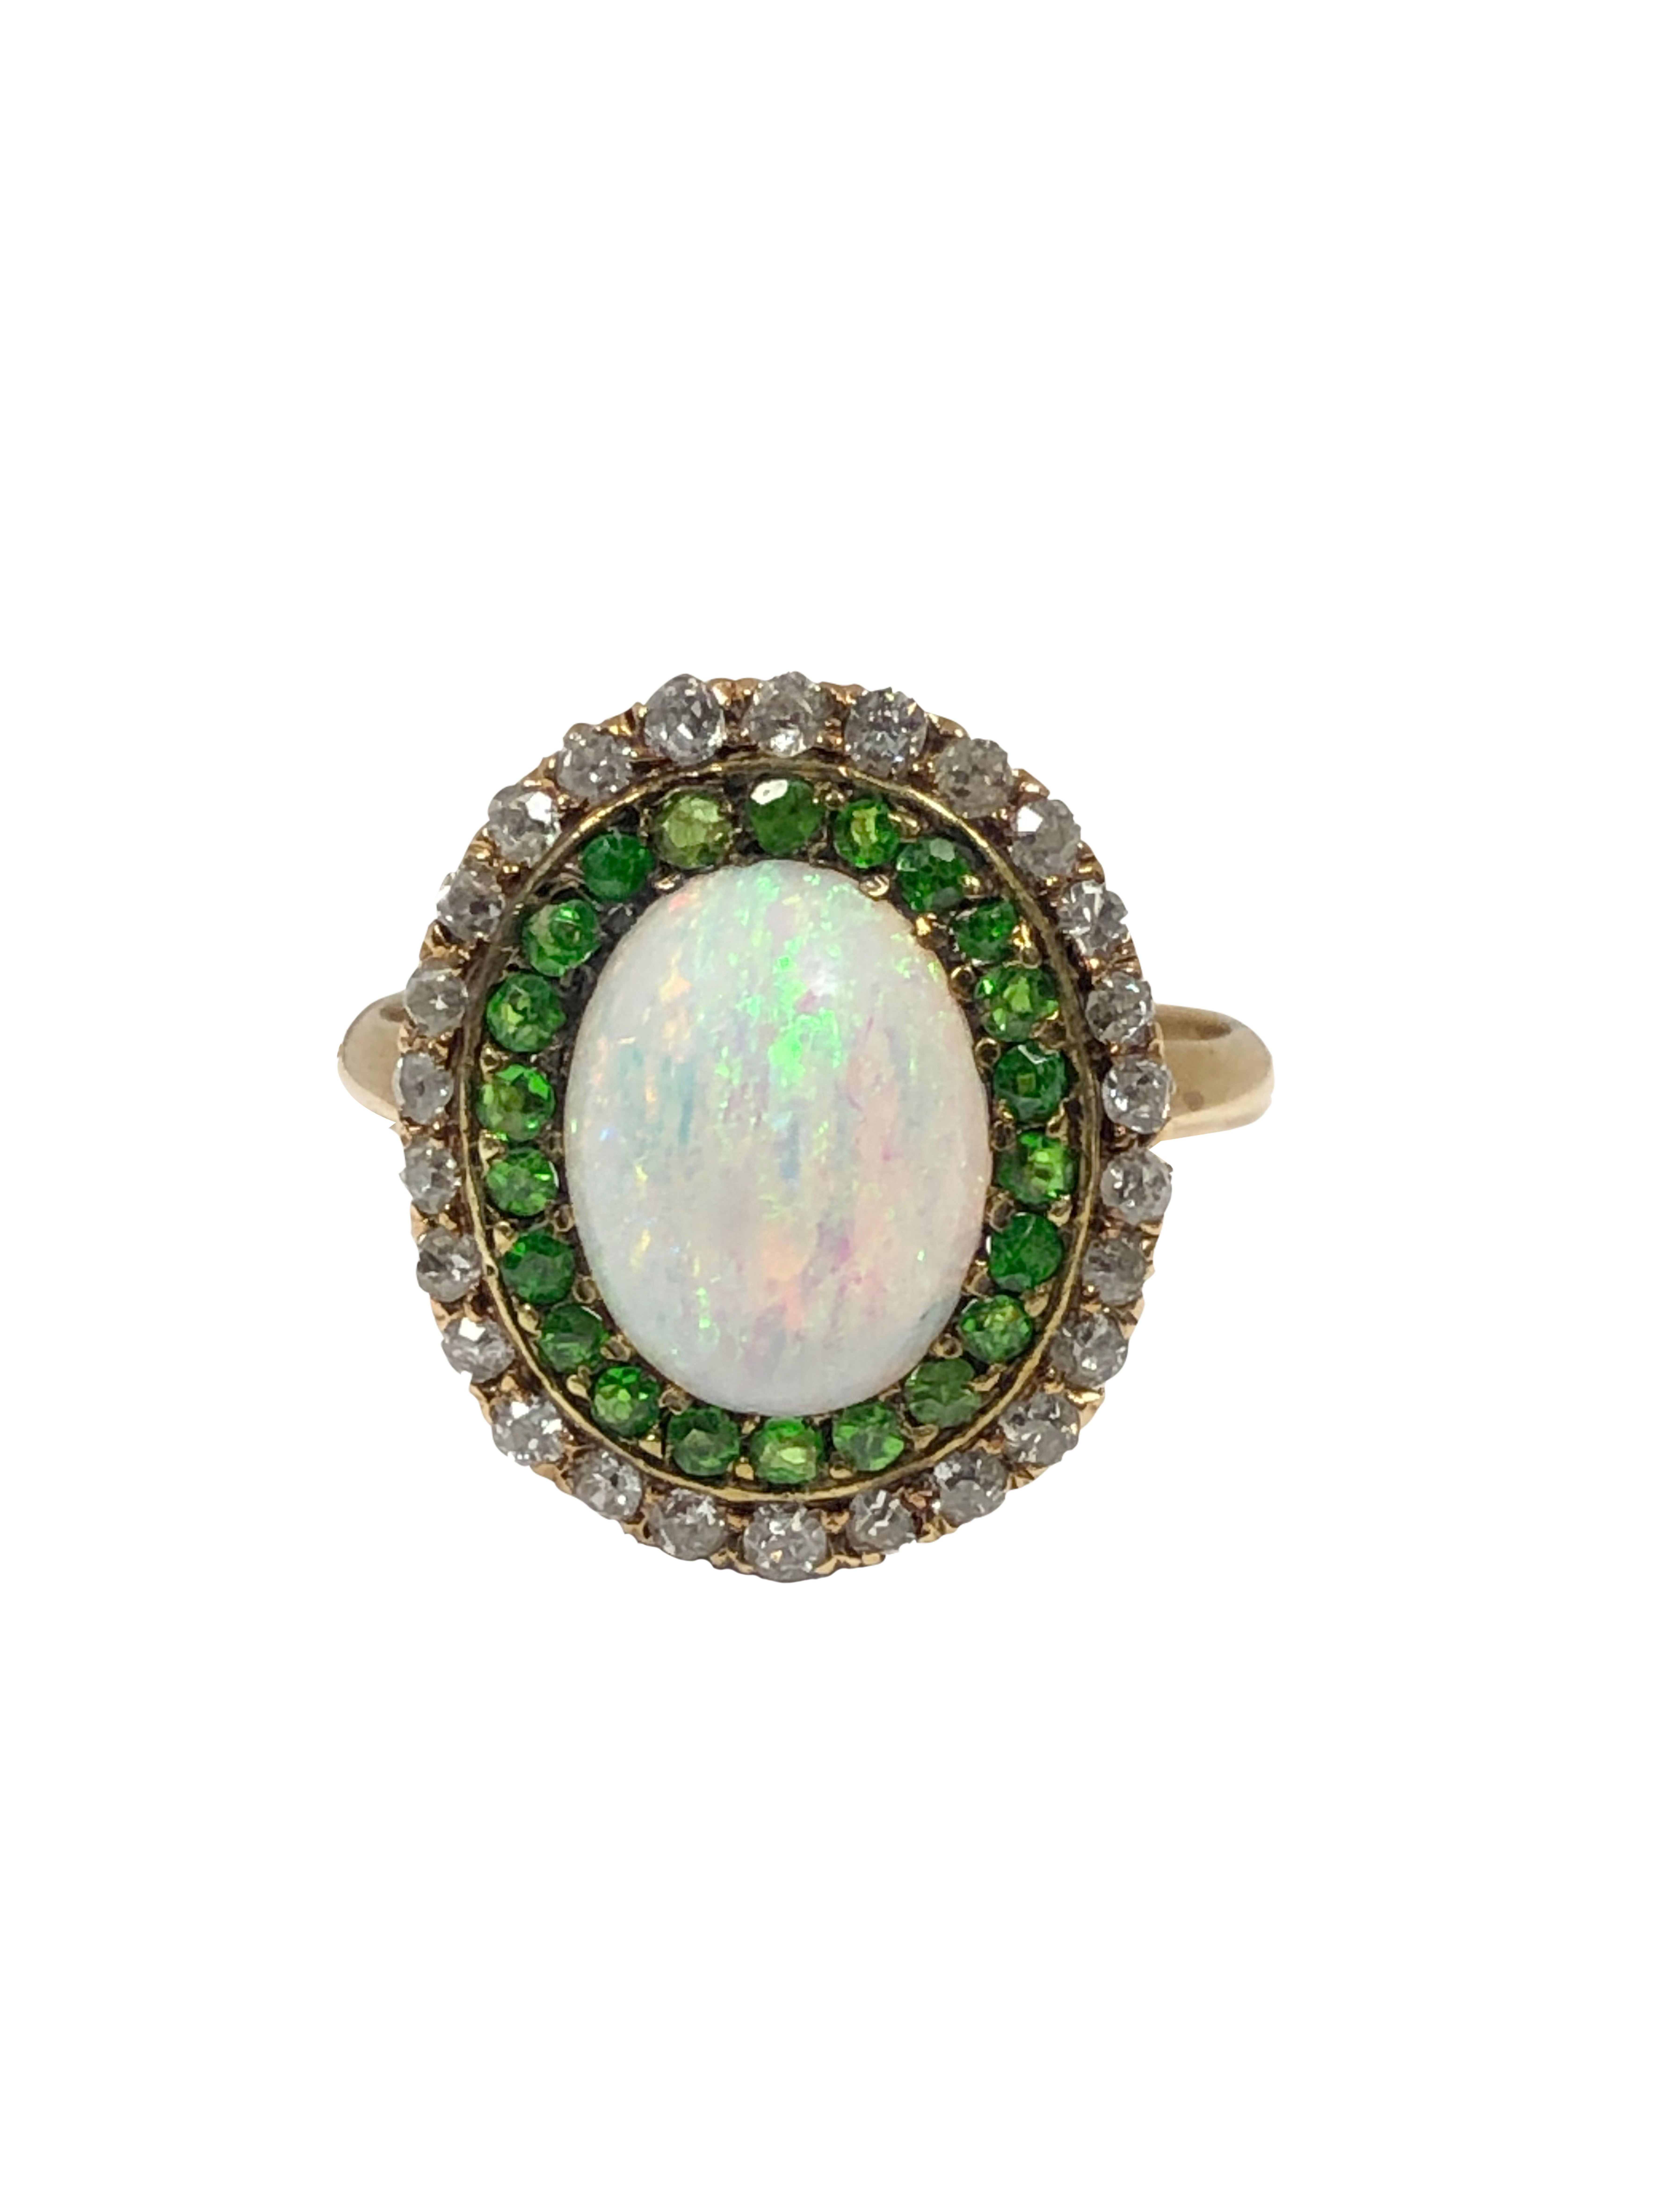 Circa 1910 14k Yellow Gold Ring, the top measures 3/4 X 5/8 inch, centrally set with a domed Opal with Bright fire colors of Blue, Green and Red, surrounded by Very fine Russian Ural Demantoid Garnets and further surrounded by a row of Mine cut